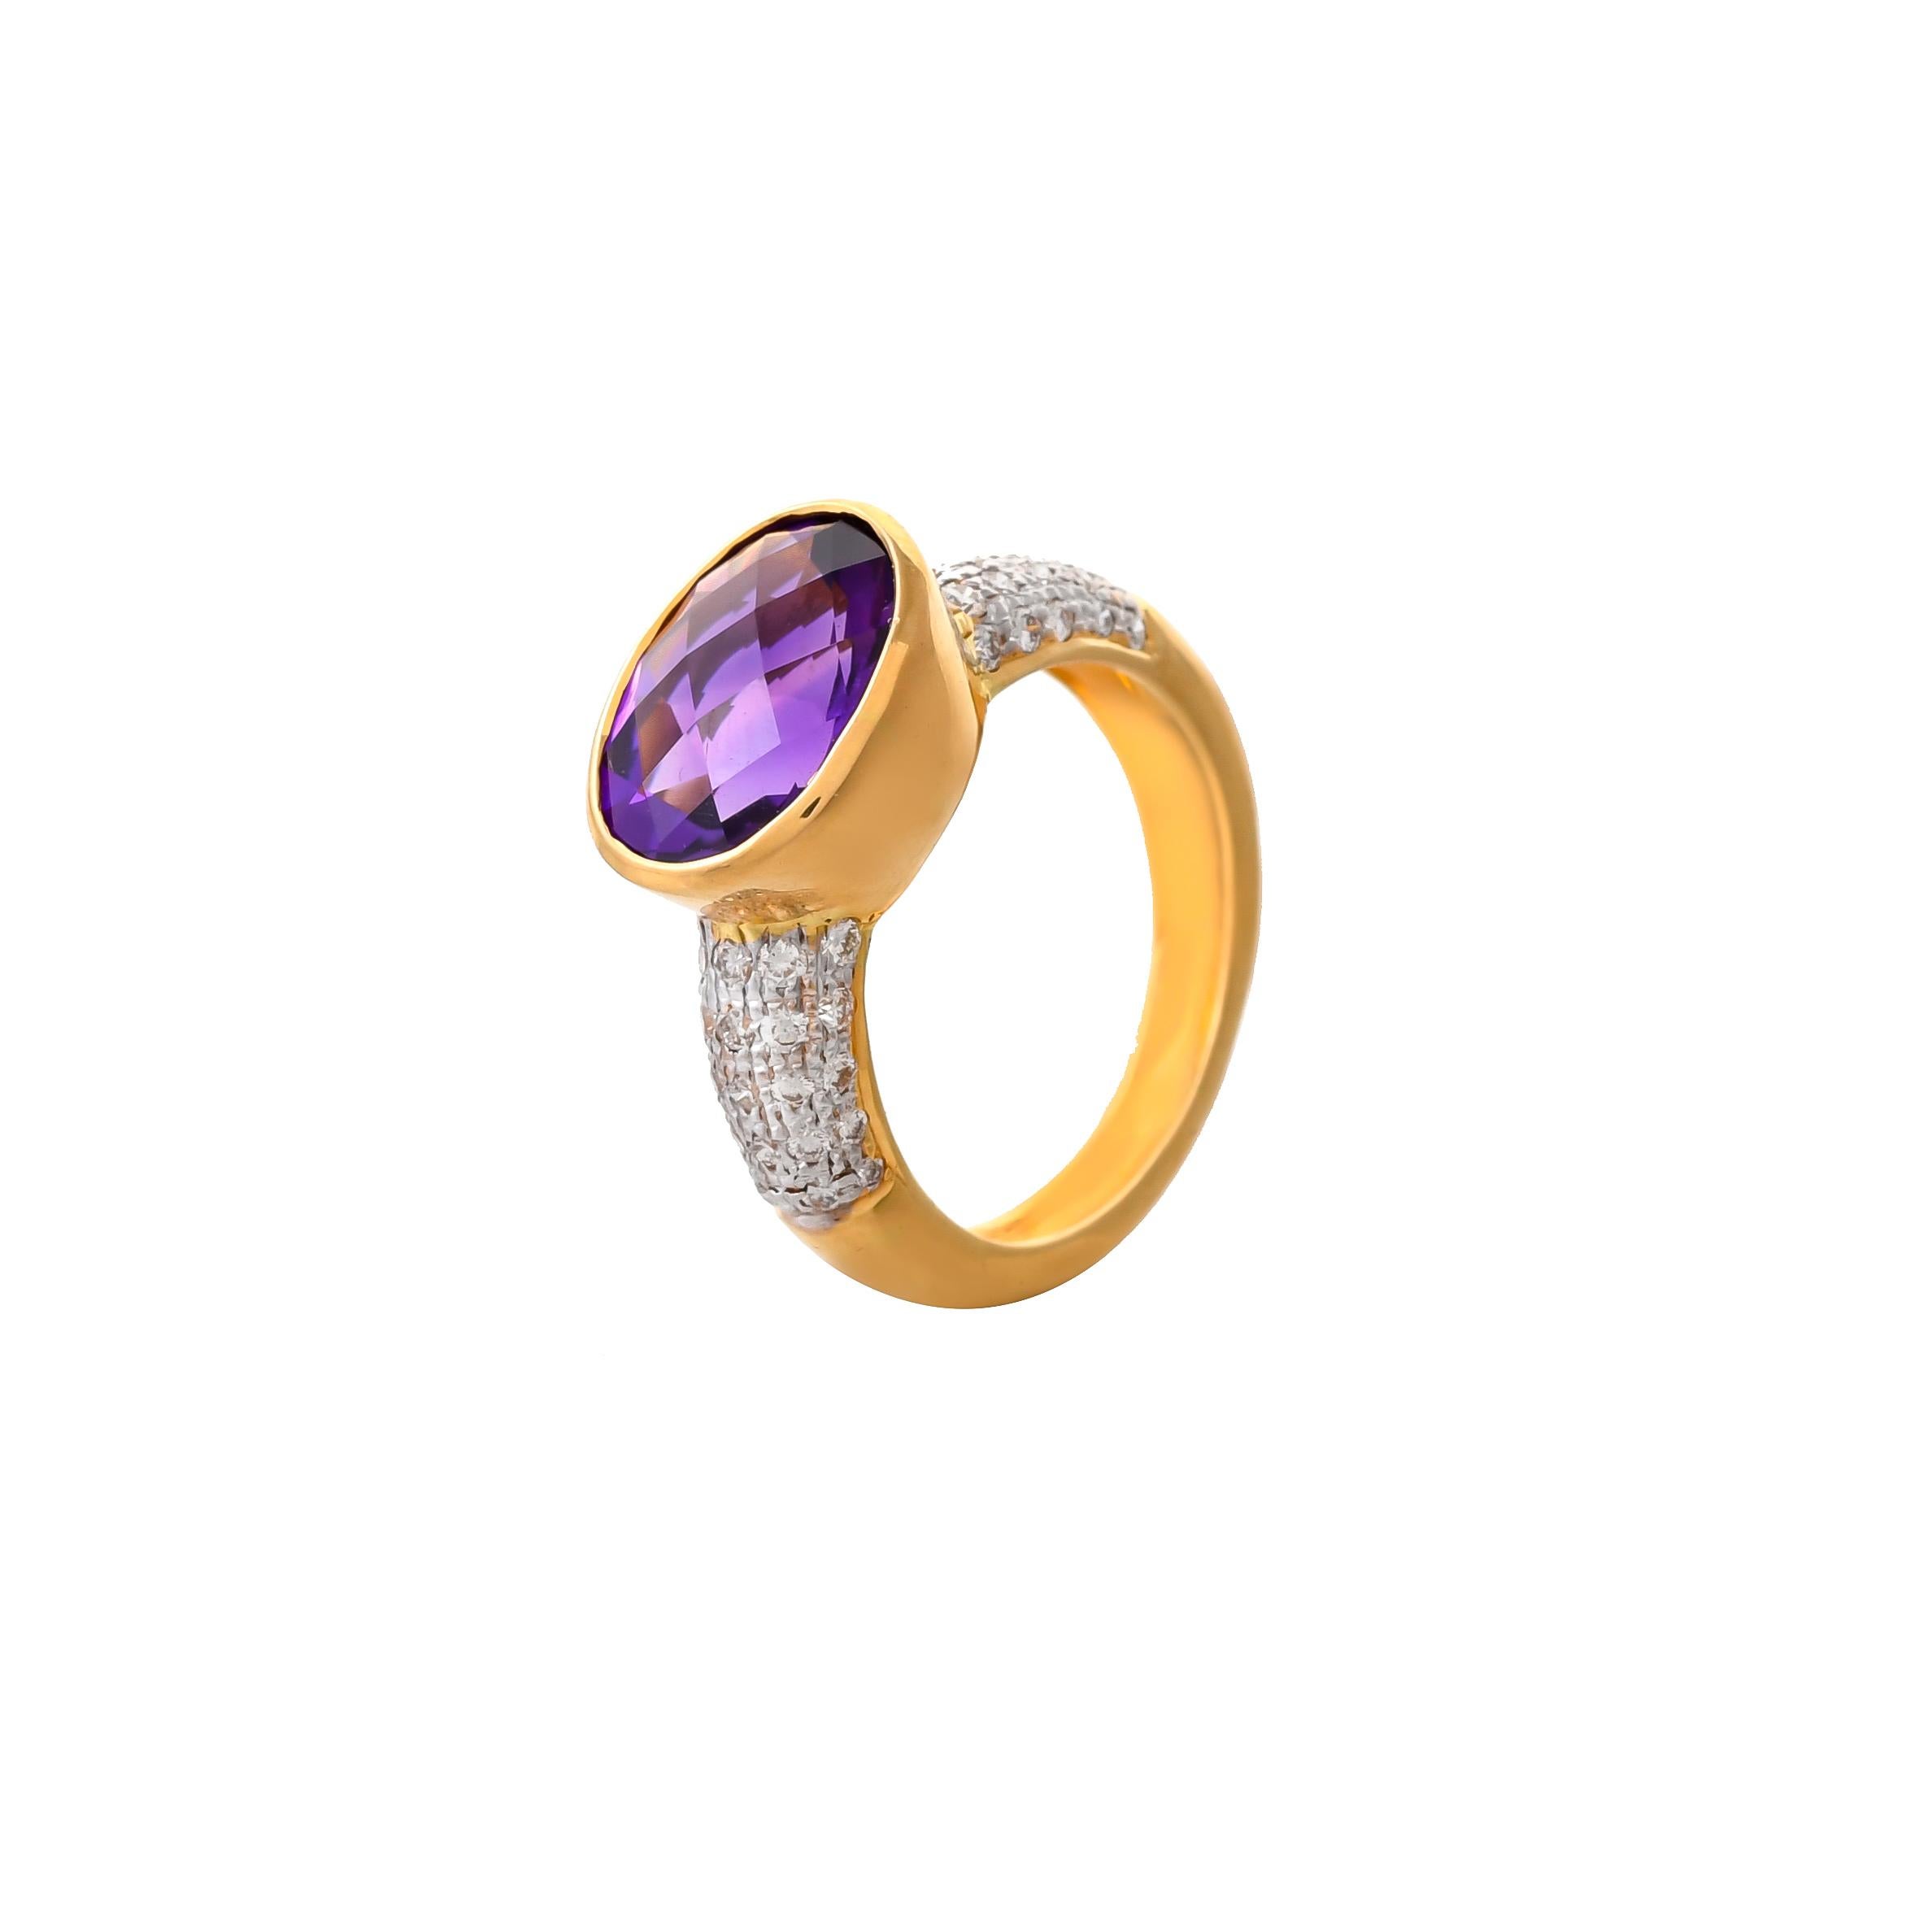 Design to encourage serenity, peace and royalty , this beautiful ring features oval-shaped amethyst weighing approximately 3.89 carats, inserted within a yellow gold bezel on a tapering band of 18 karats yellow gold pave set with round diamonds